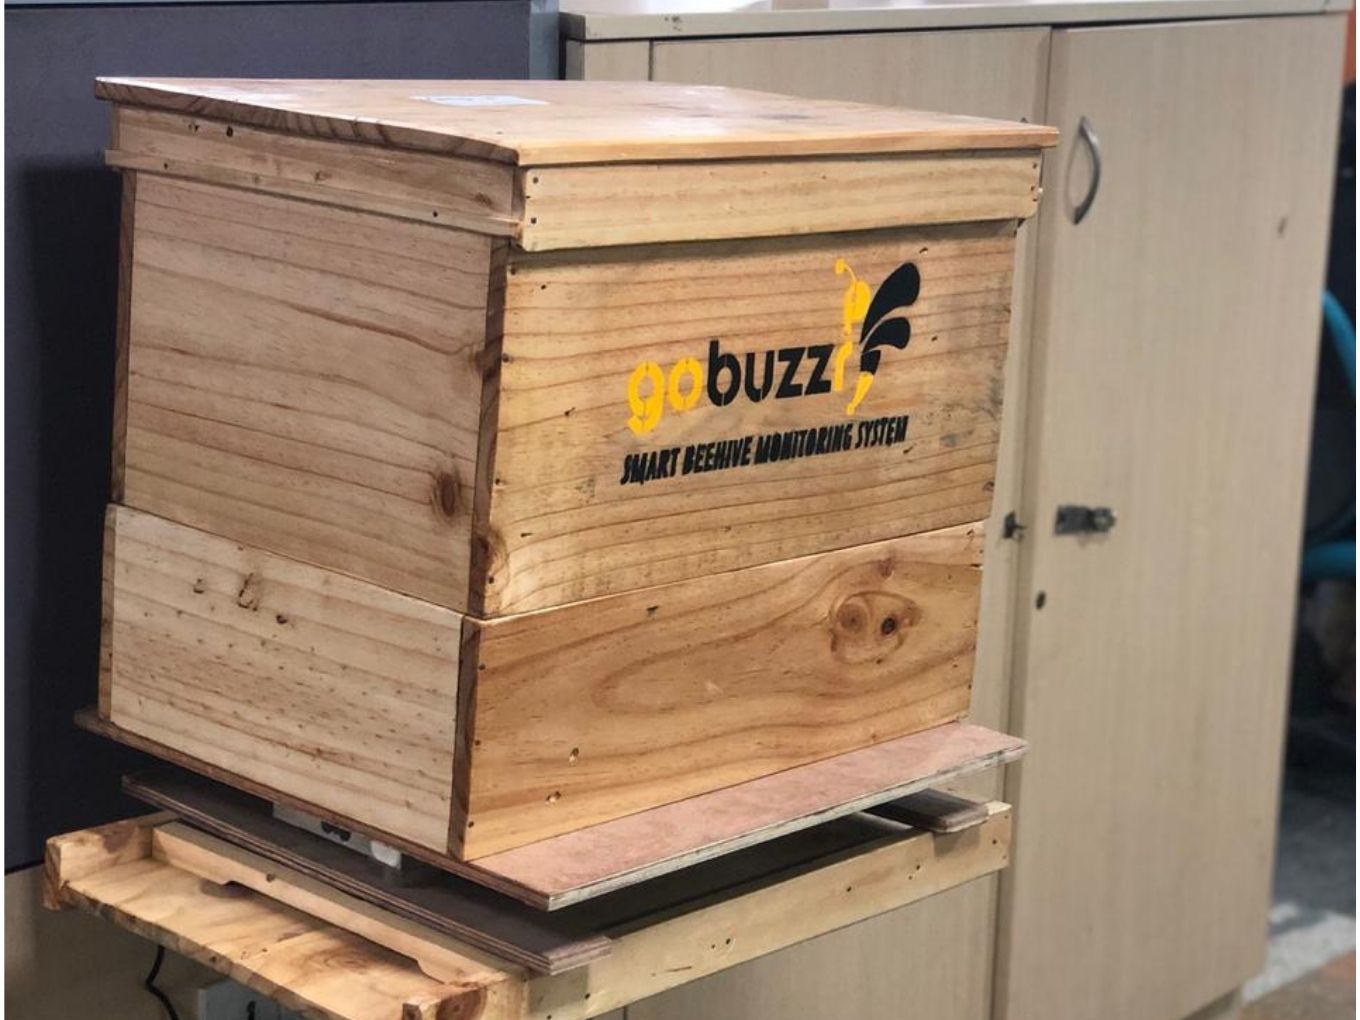 Chennai-Based Gobuzzr's IoT Play Looks To Take The Sting Out Of Bee Farming